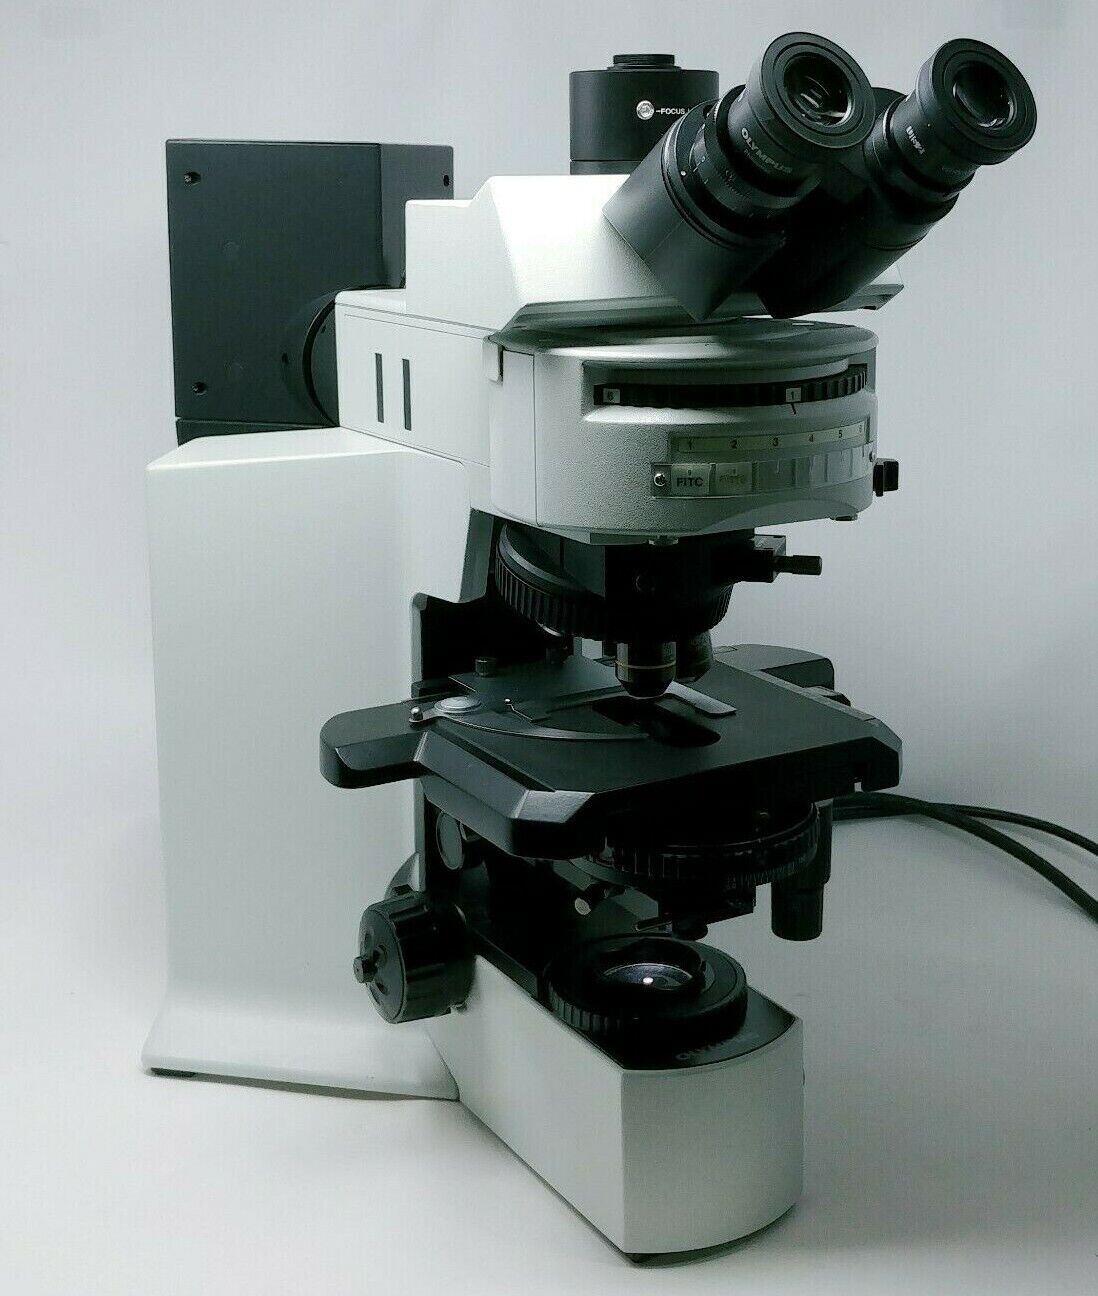 Olympus Microscope BX51 with DIC and Fluorescence - microscopemarketplace